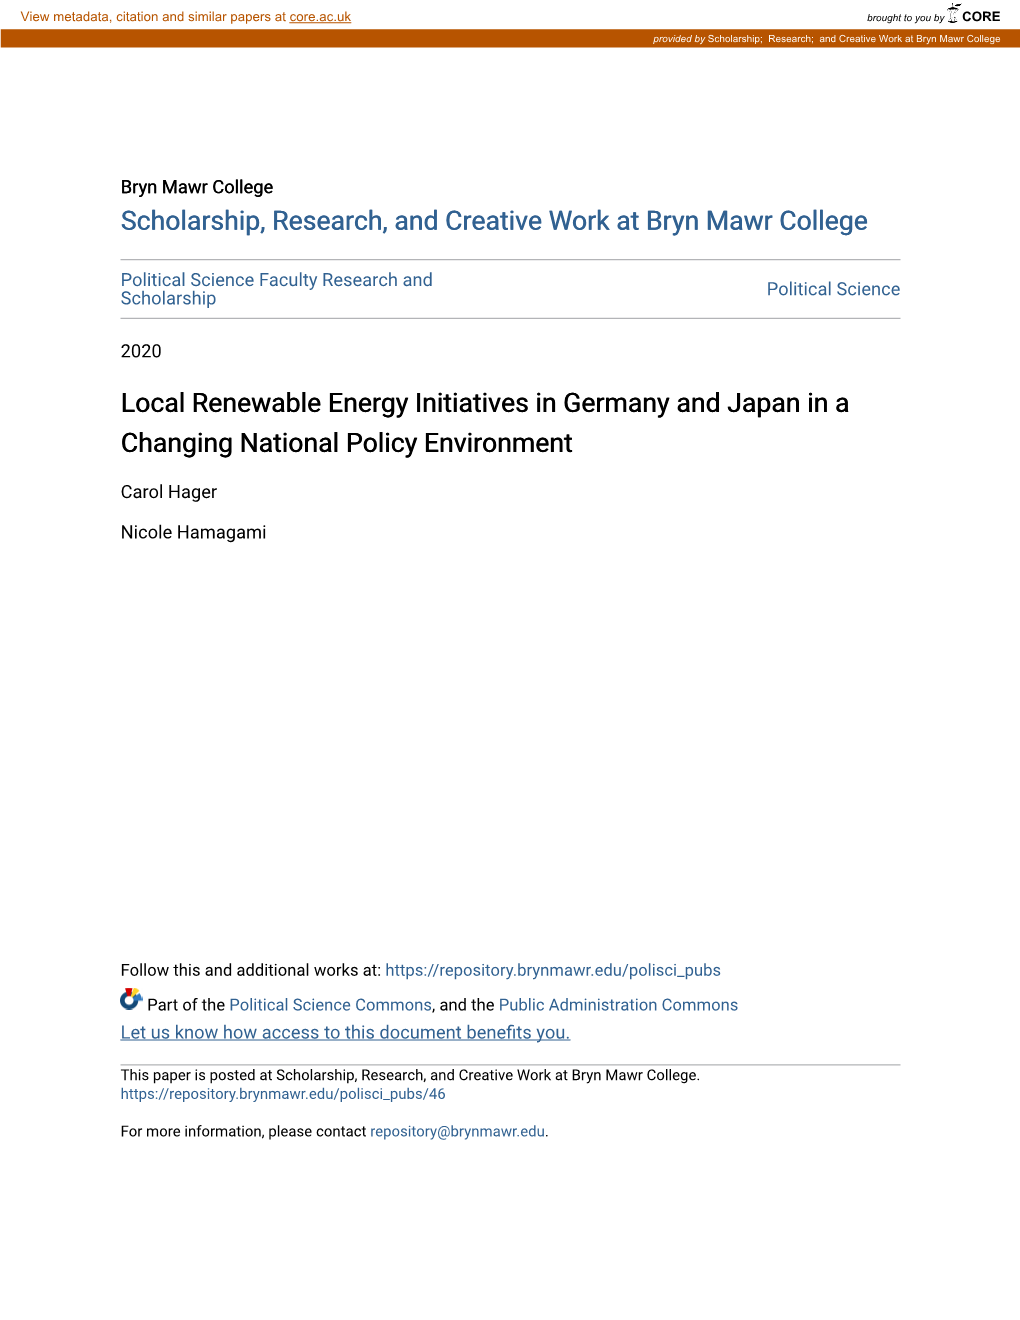 Local Renewable Energy Initiatives in Germany and Japan in a Changing National Policy Environment